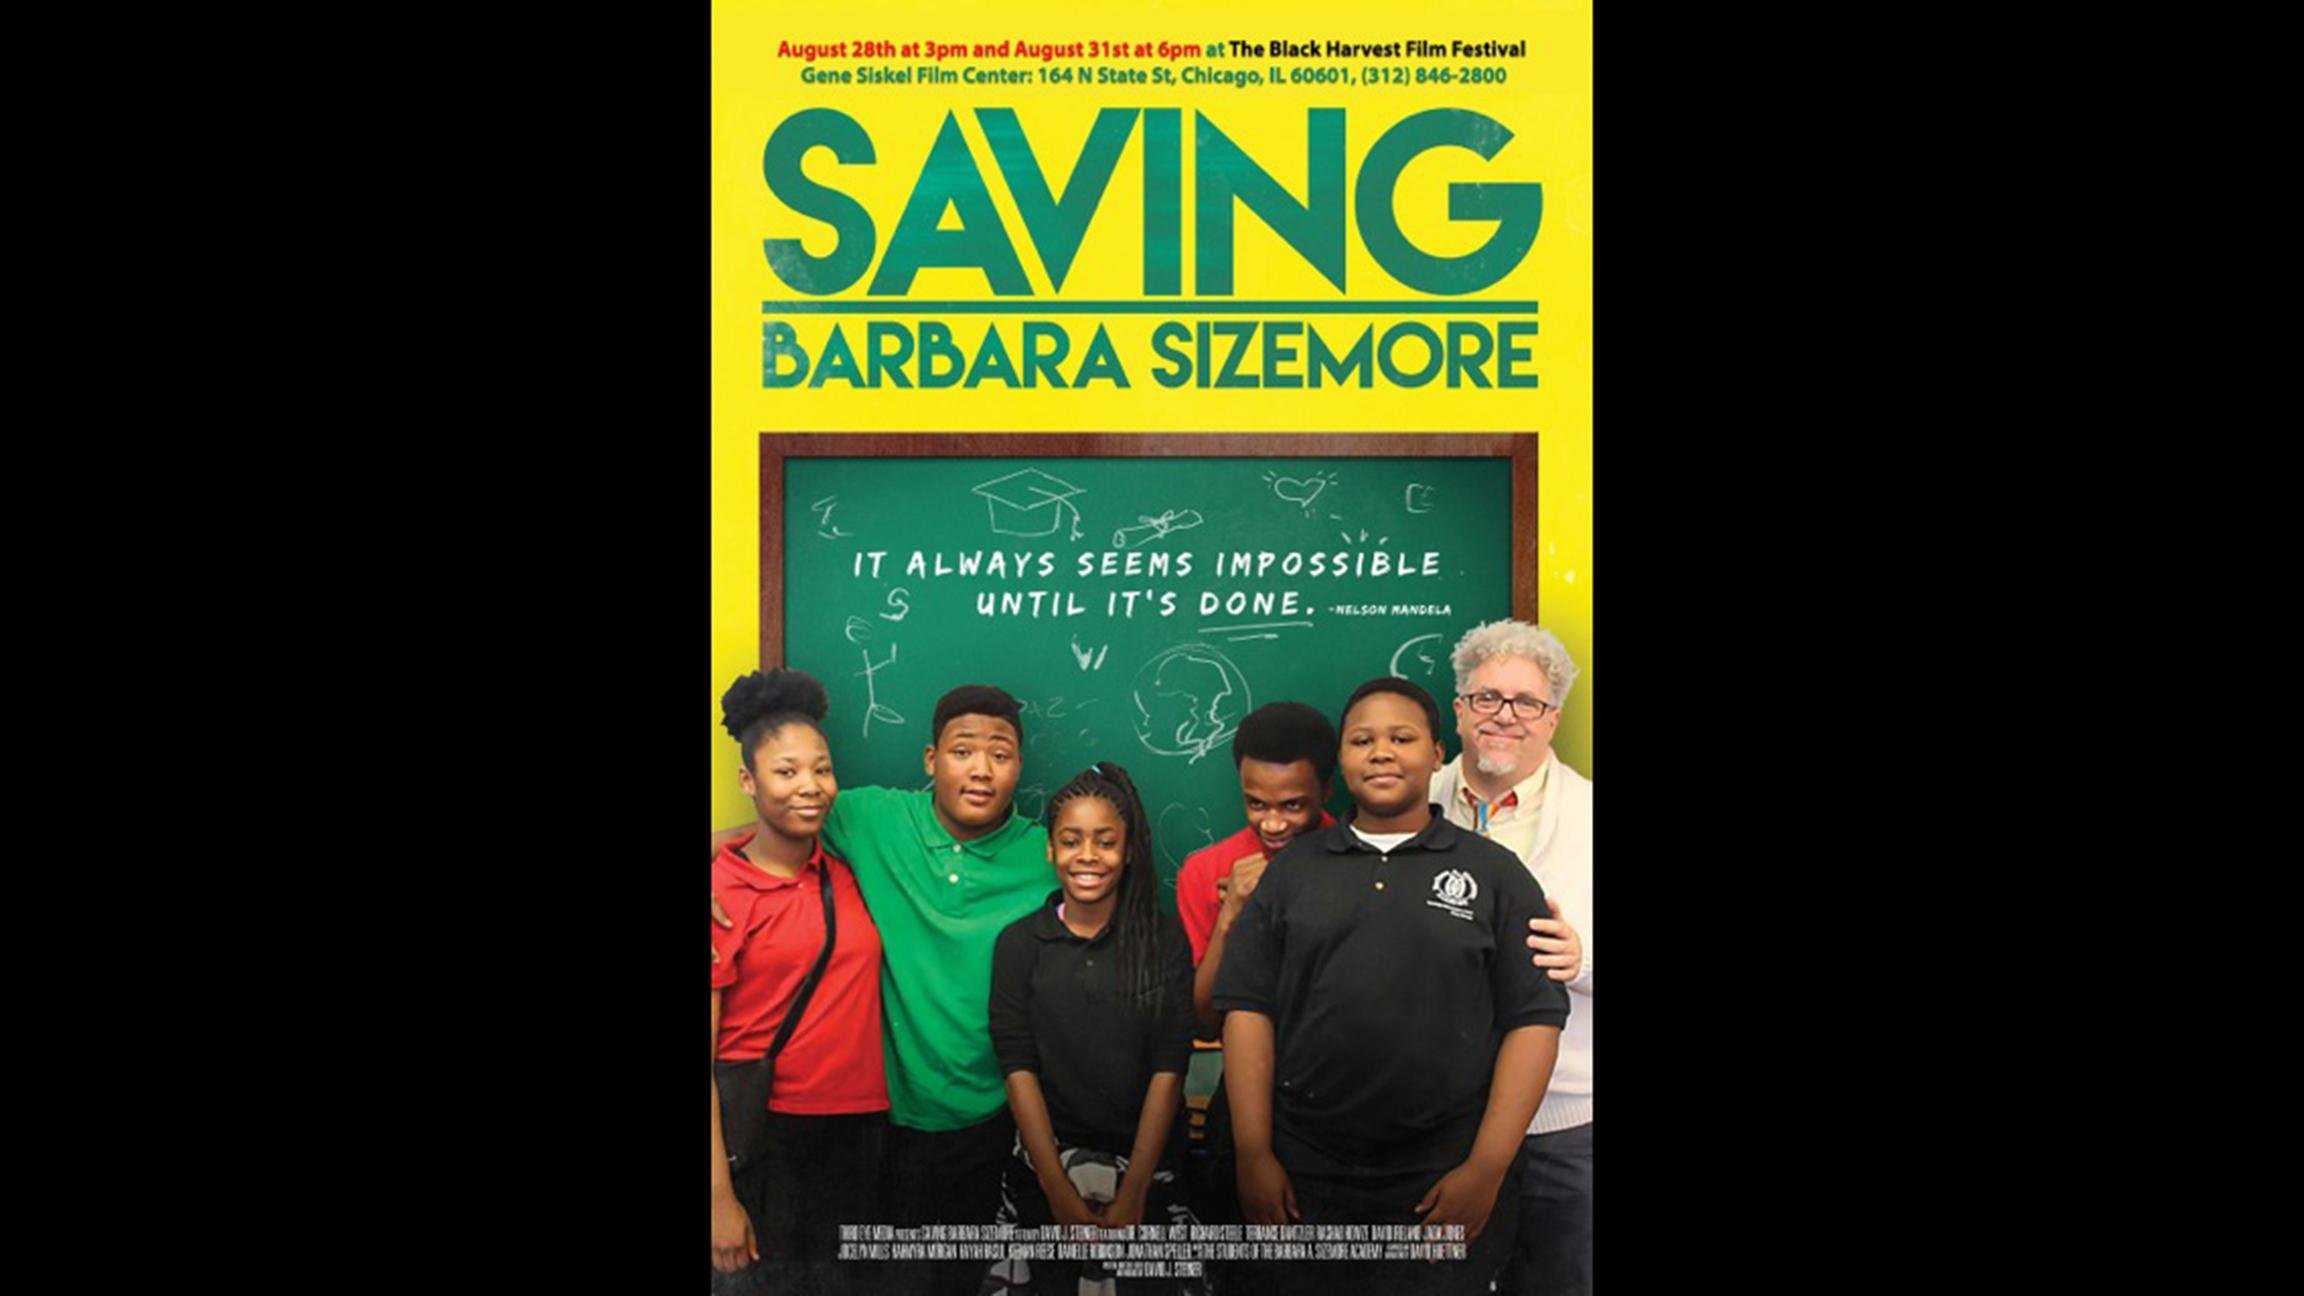 Movie poster for the documentary “Saving Barbara Sizemore” showcases student filmmakers and the film’s director.